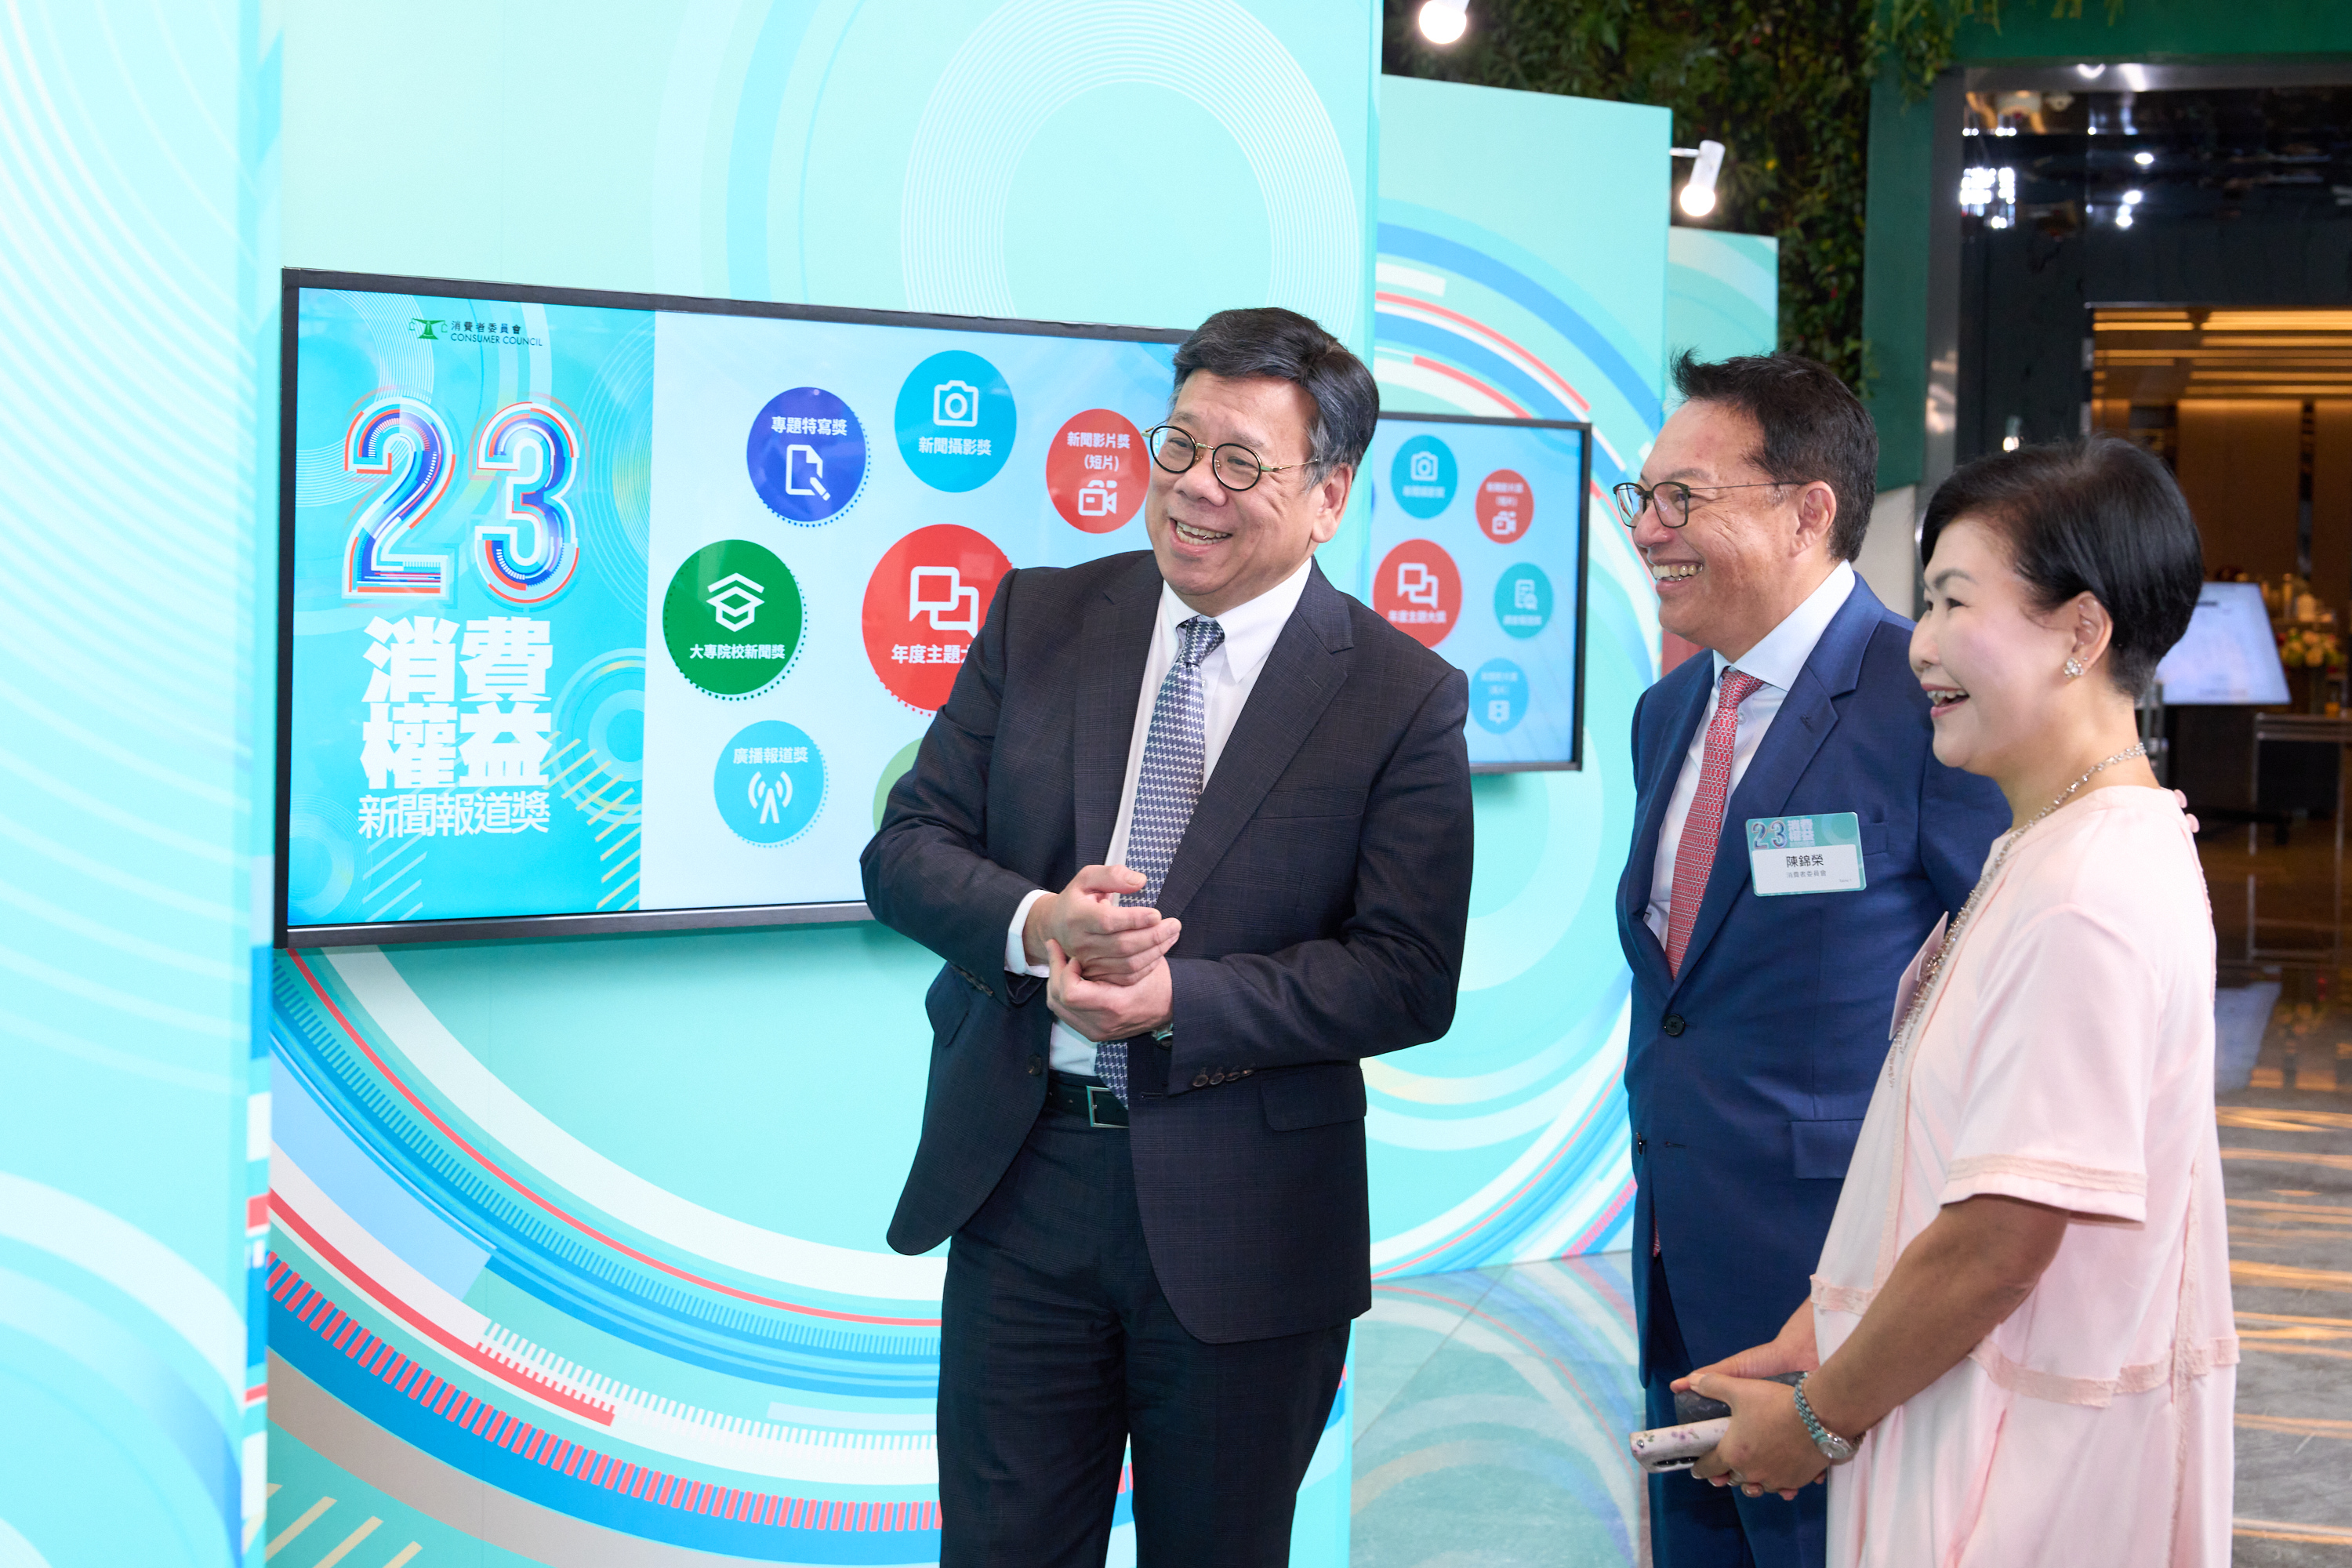 The Honourable Algernon Yau Ying-wah, Secretary for Commerce and Economic Development, viewing exhibit of winning entries accompanied by Mr Clement Chan Kam-wing, Chairman of the Consumer Council, Mr Tony Pang Chor-fu, Vice-Chairman of the Consumer Council and Ms Gilly Wong Fung-han, Chief Executive of the Consumer Council.